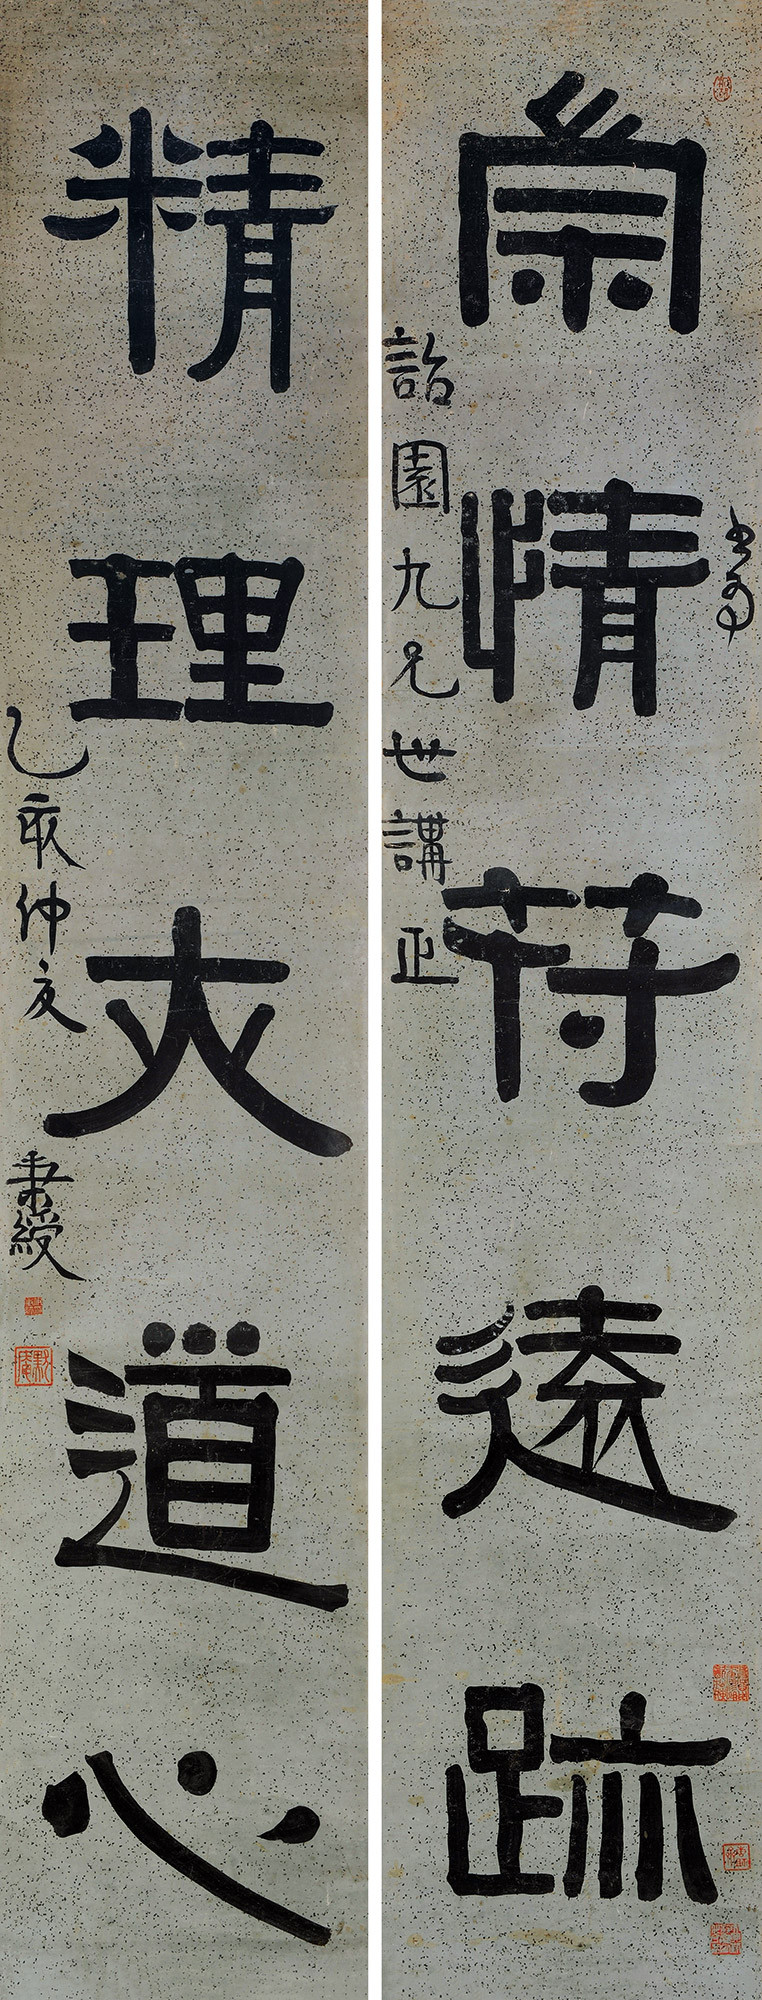 five-character calligraphy in official script